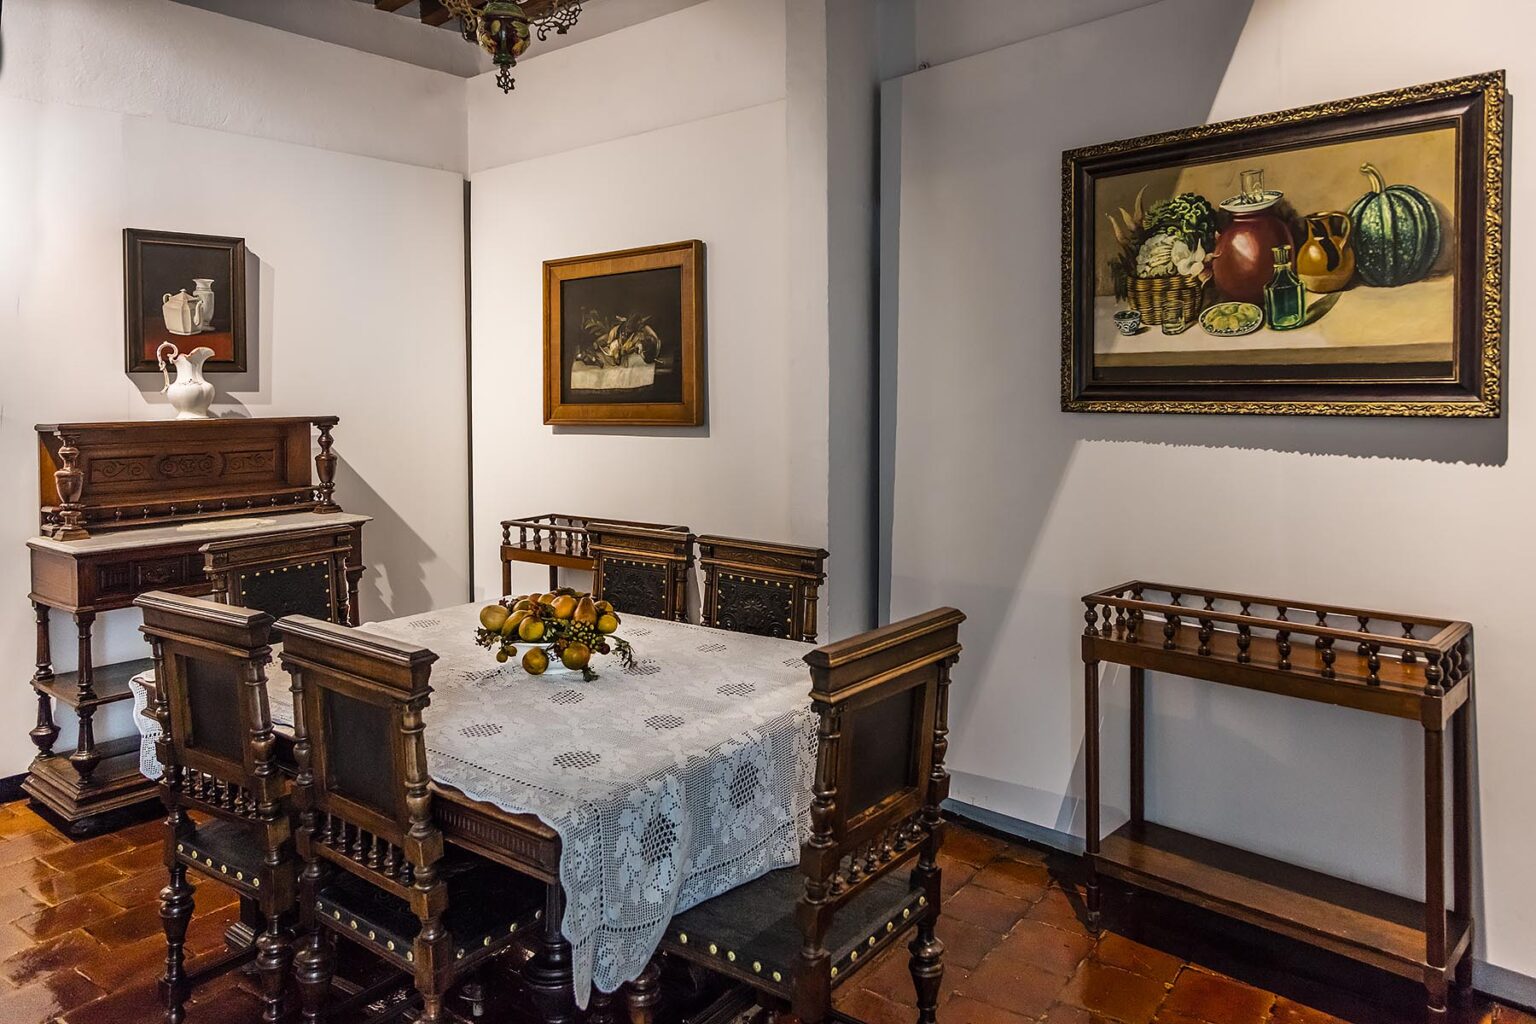 The DIEGO RIVERA MUSEUM is located in his childhood home - GUANAJUATO, MEXICO